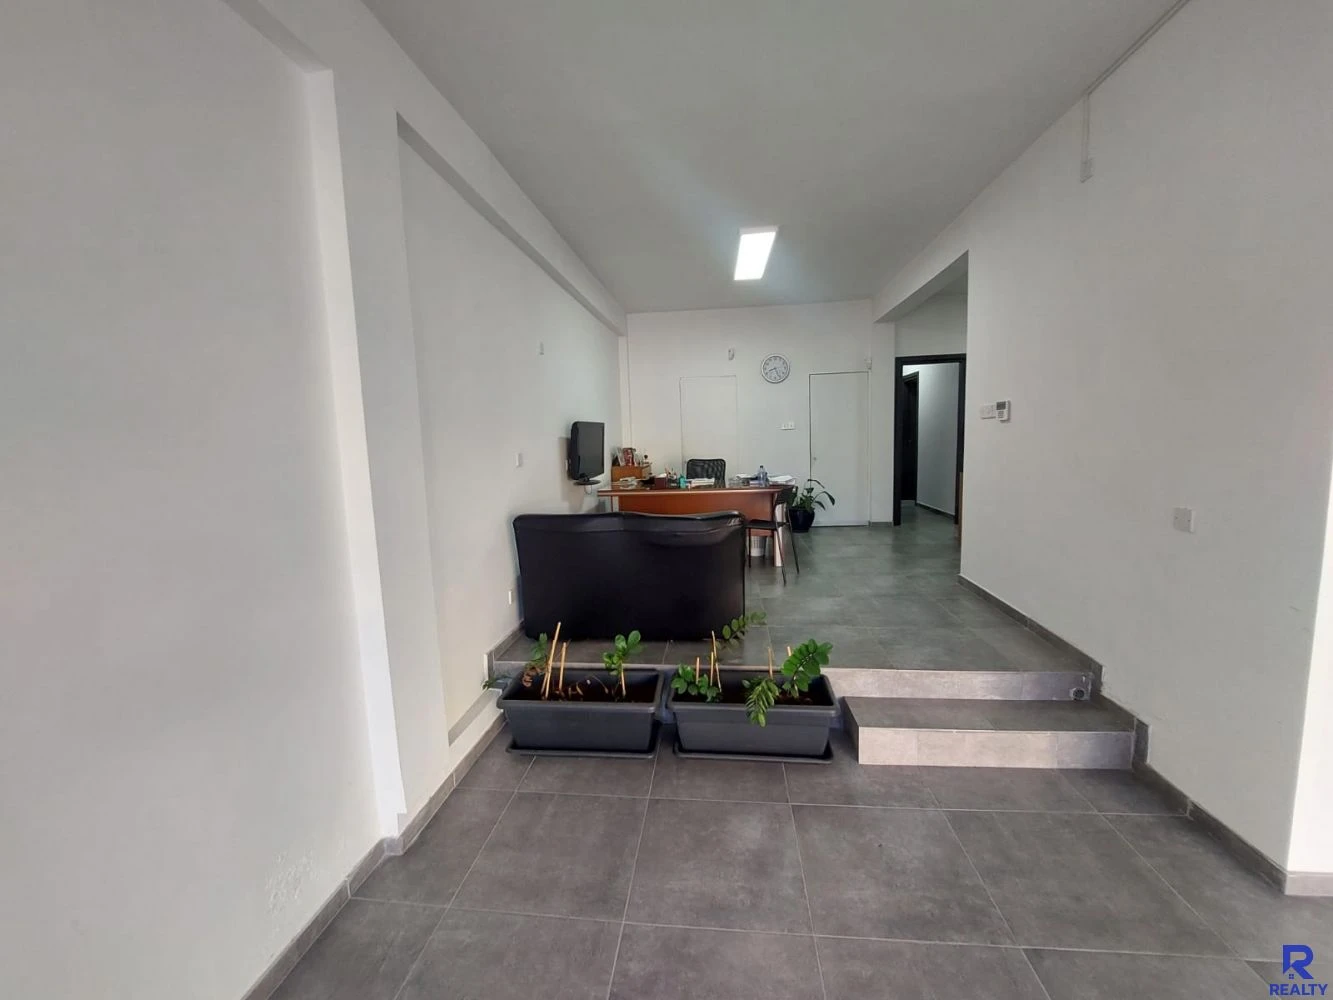 Comercial property for rent, image 1